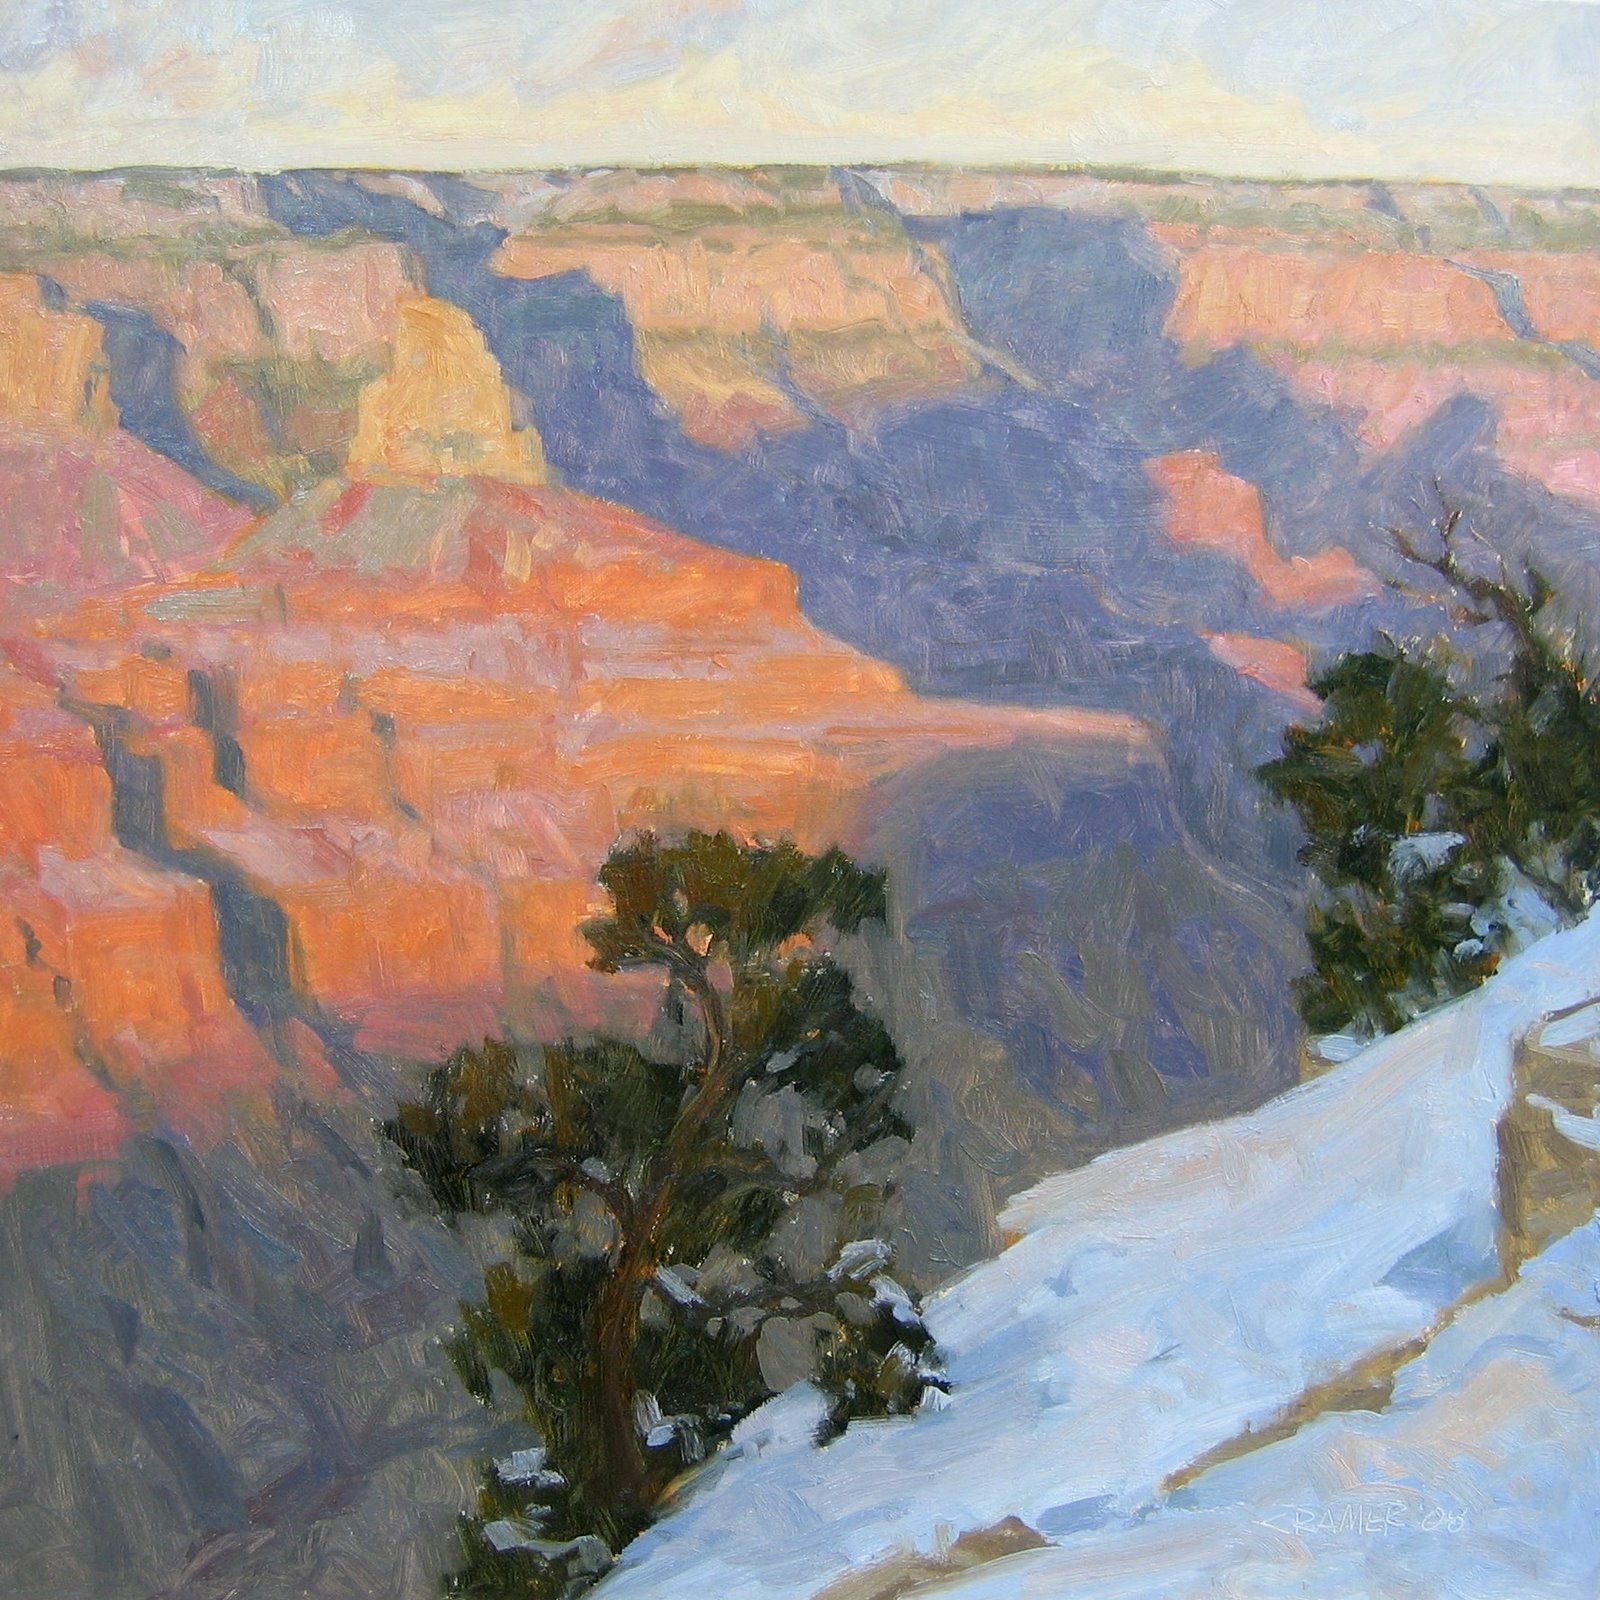 [Cold+Evening+on+the+South+Rim+001.jpg]